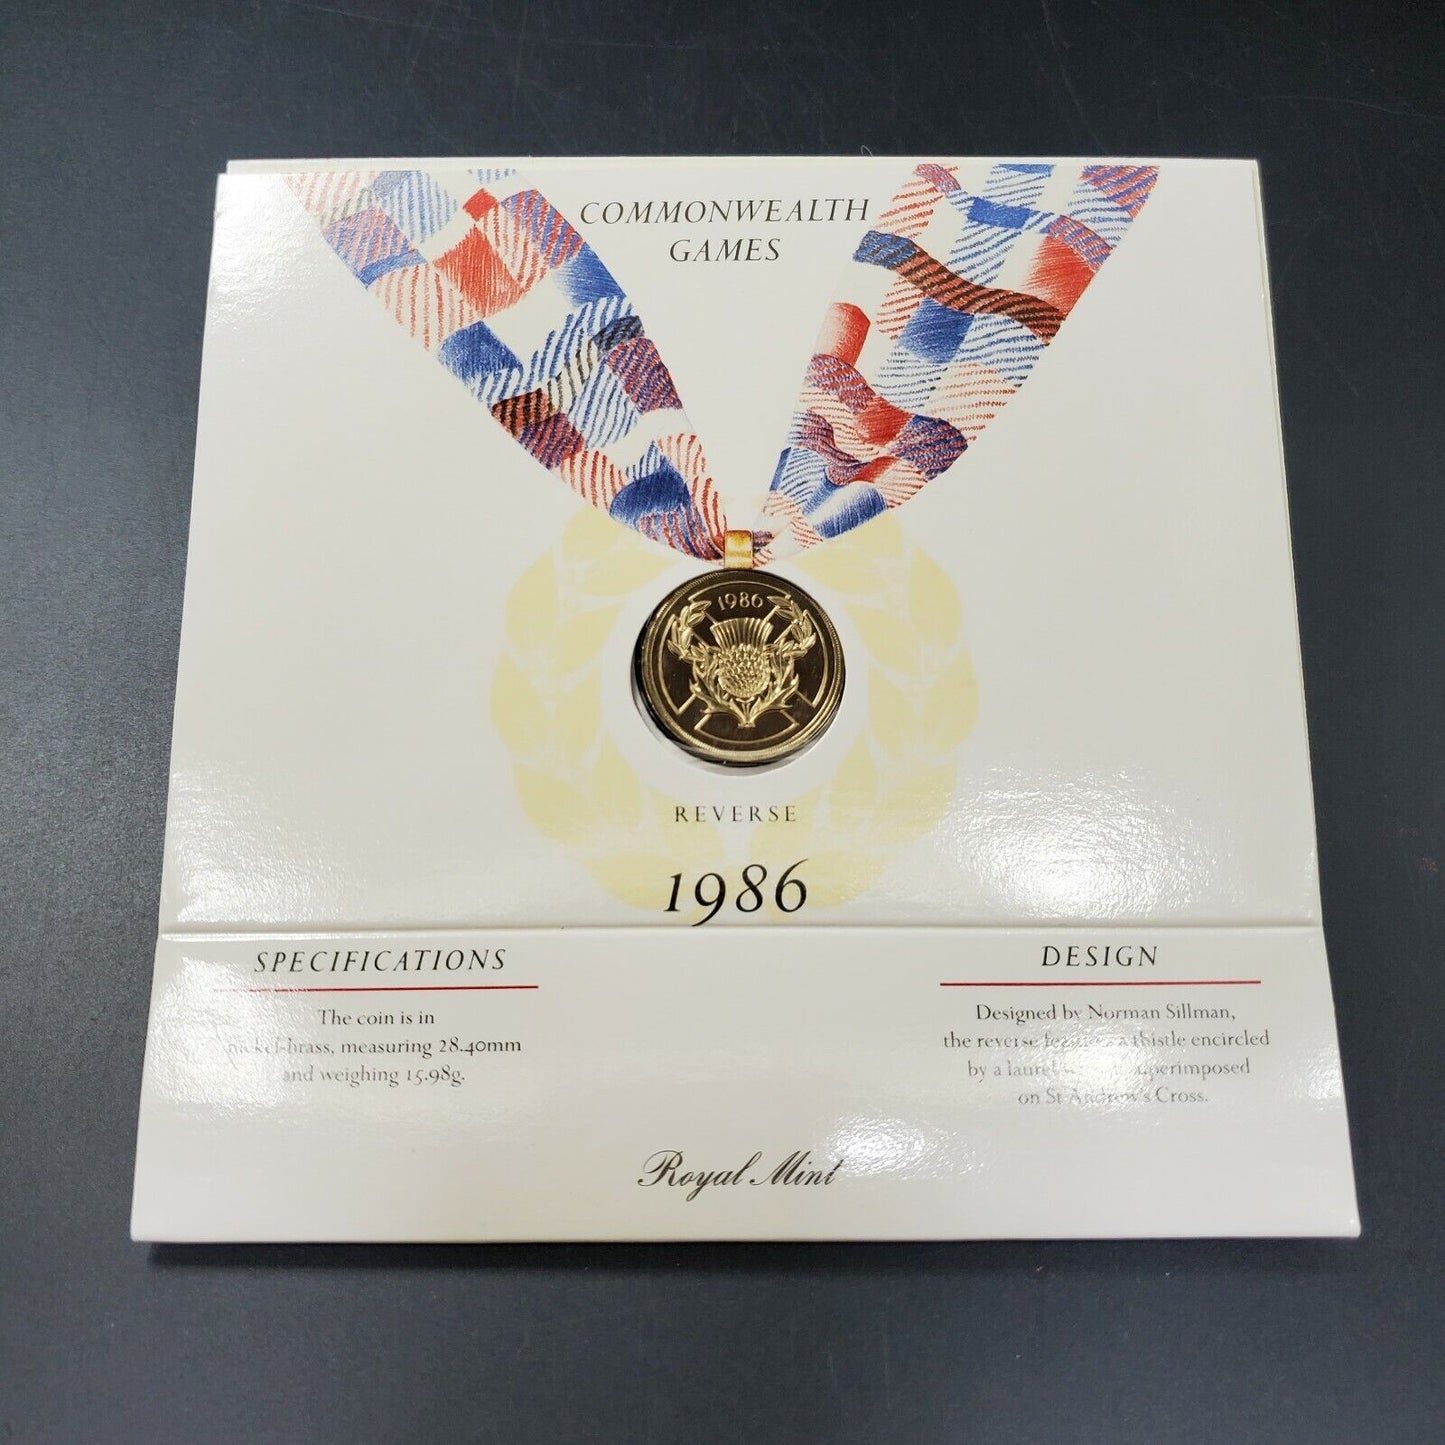 Uncirculated 1986 United Kingdom Commonwealth Games 2 Pounds Commemorative Coin